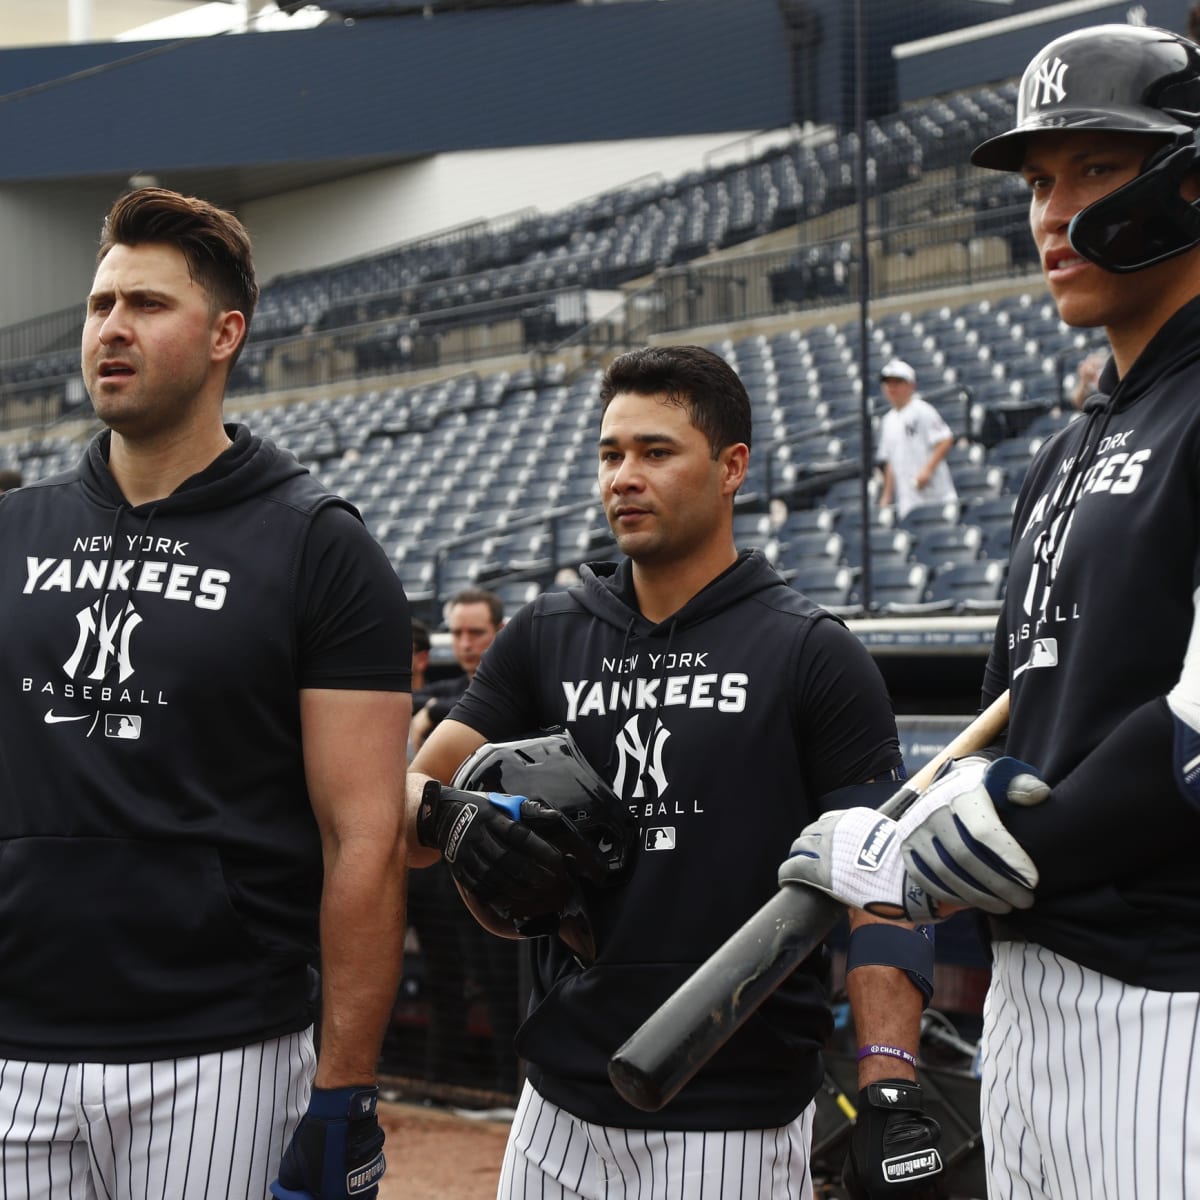 New York Yankees Opening Day Roster Prediction - Sports